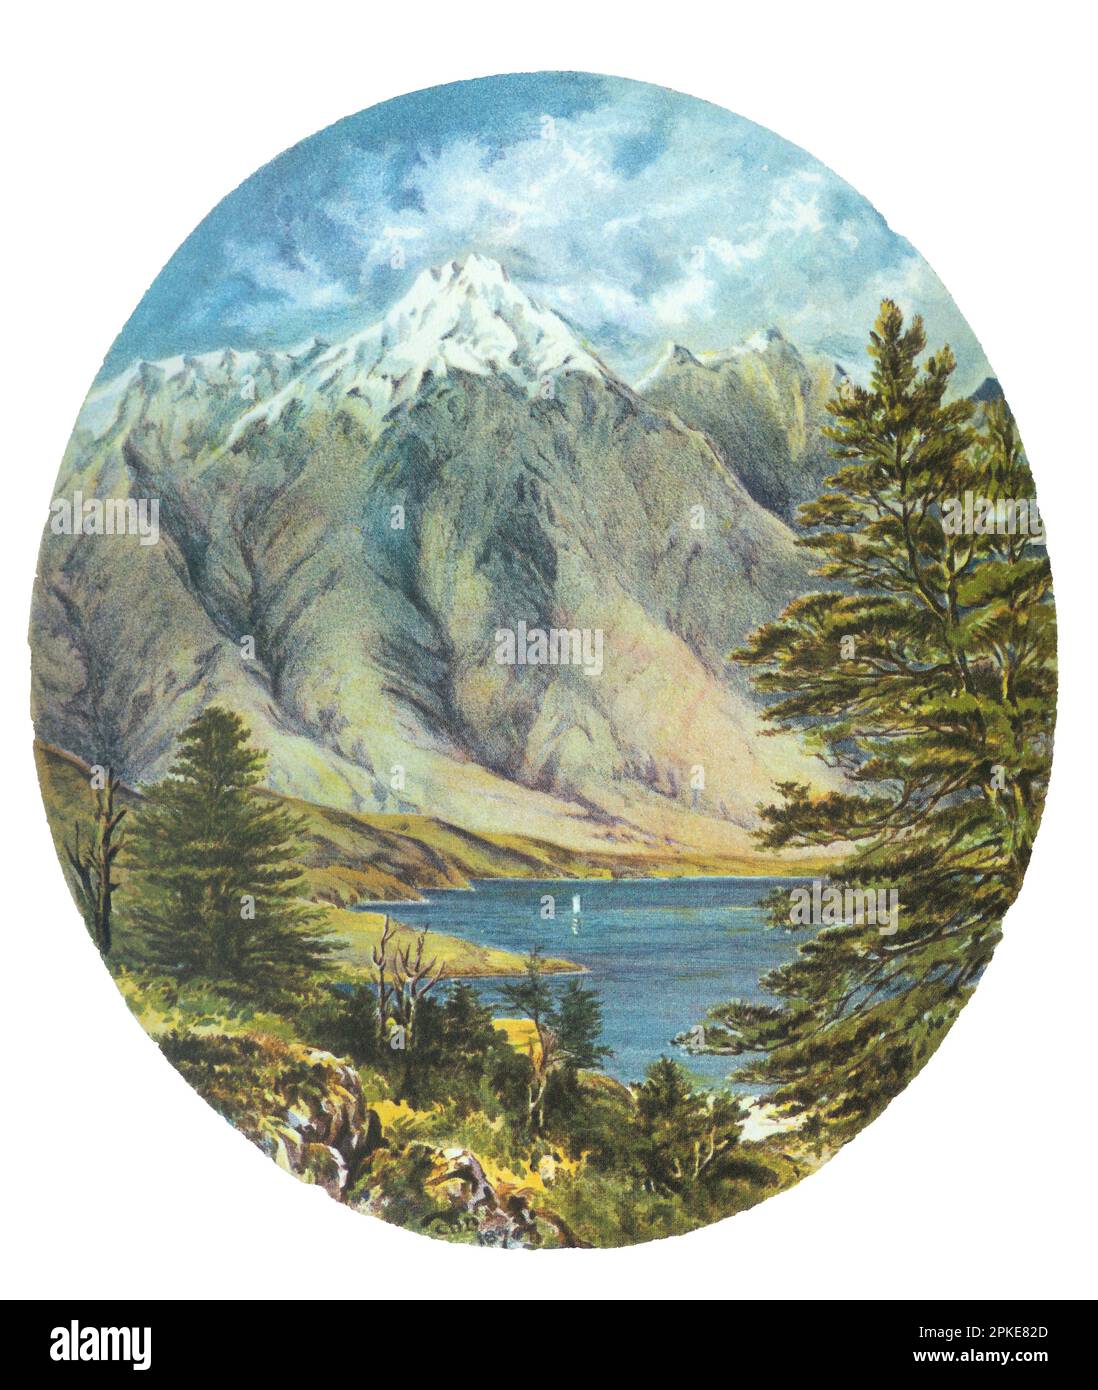 Chromolithograph of the Remarkables near Queenstown, New Zealand, by Charles Decimus Barraud, circa 1877 Stock Photo